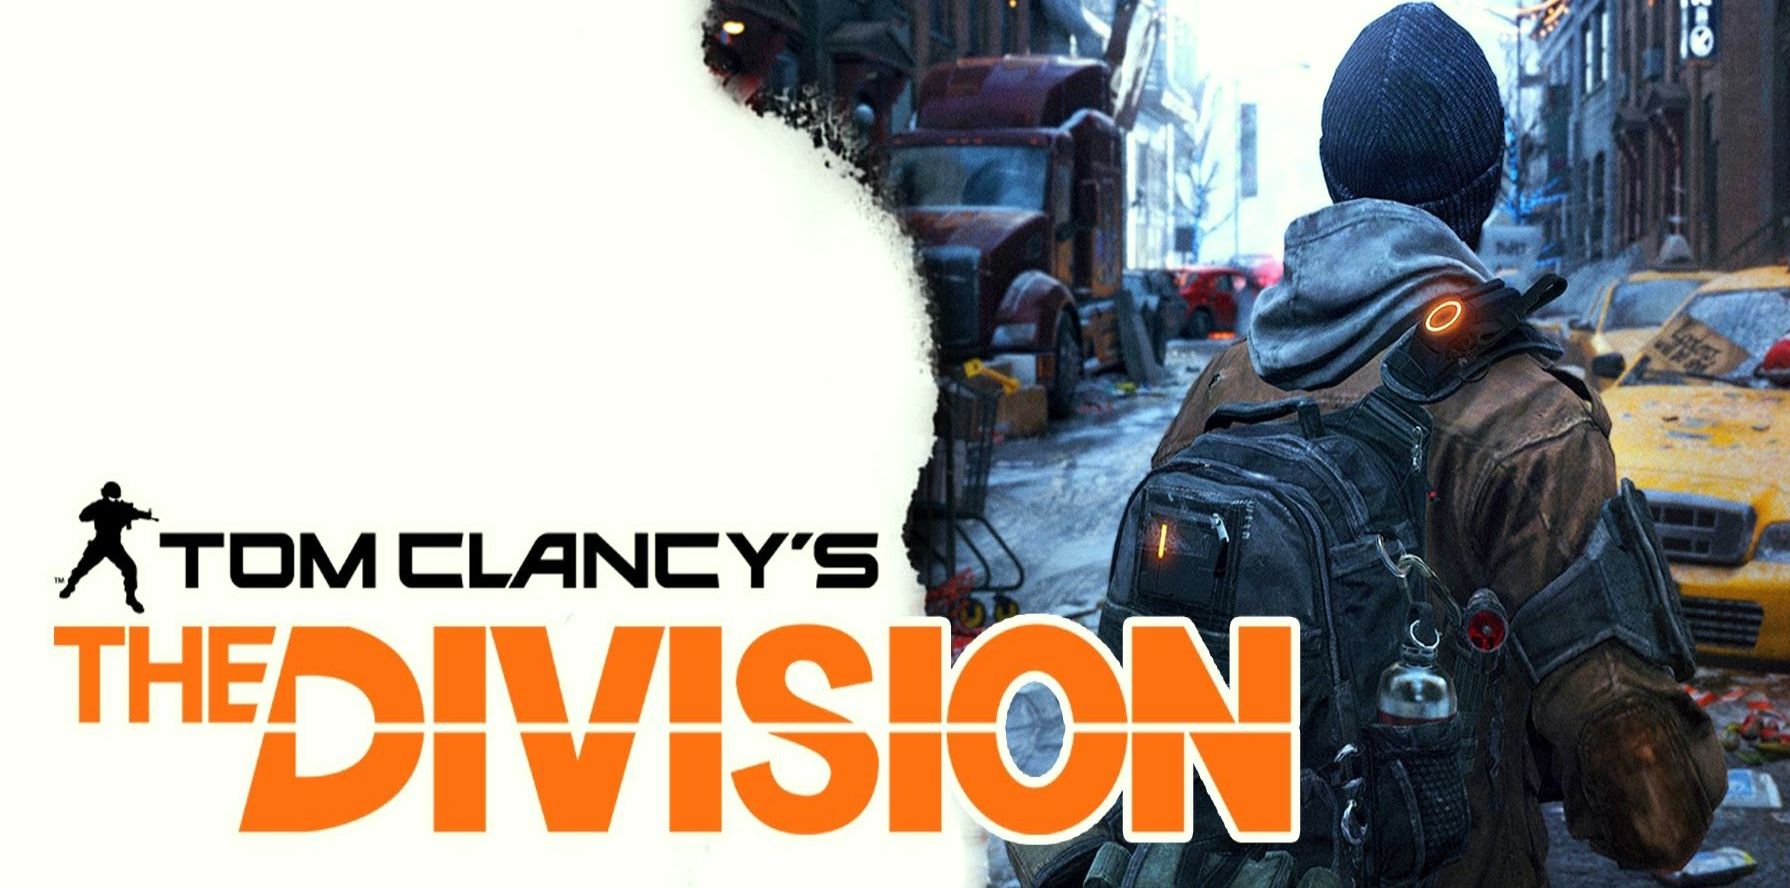 the-division-wallpaper-7